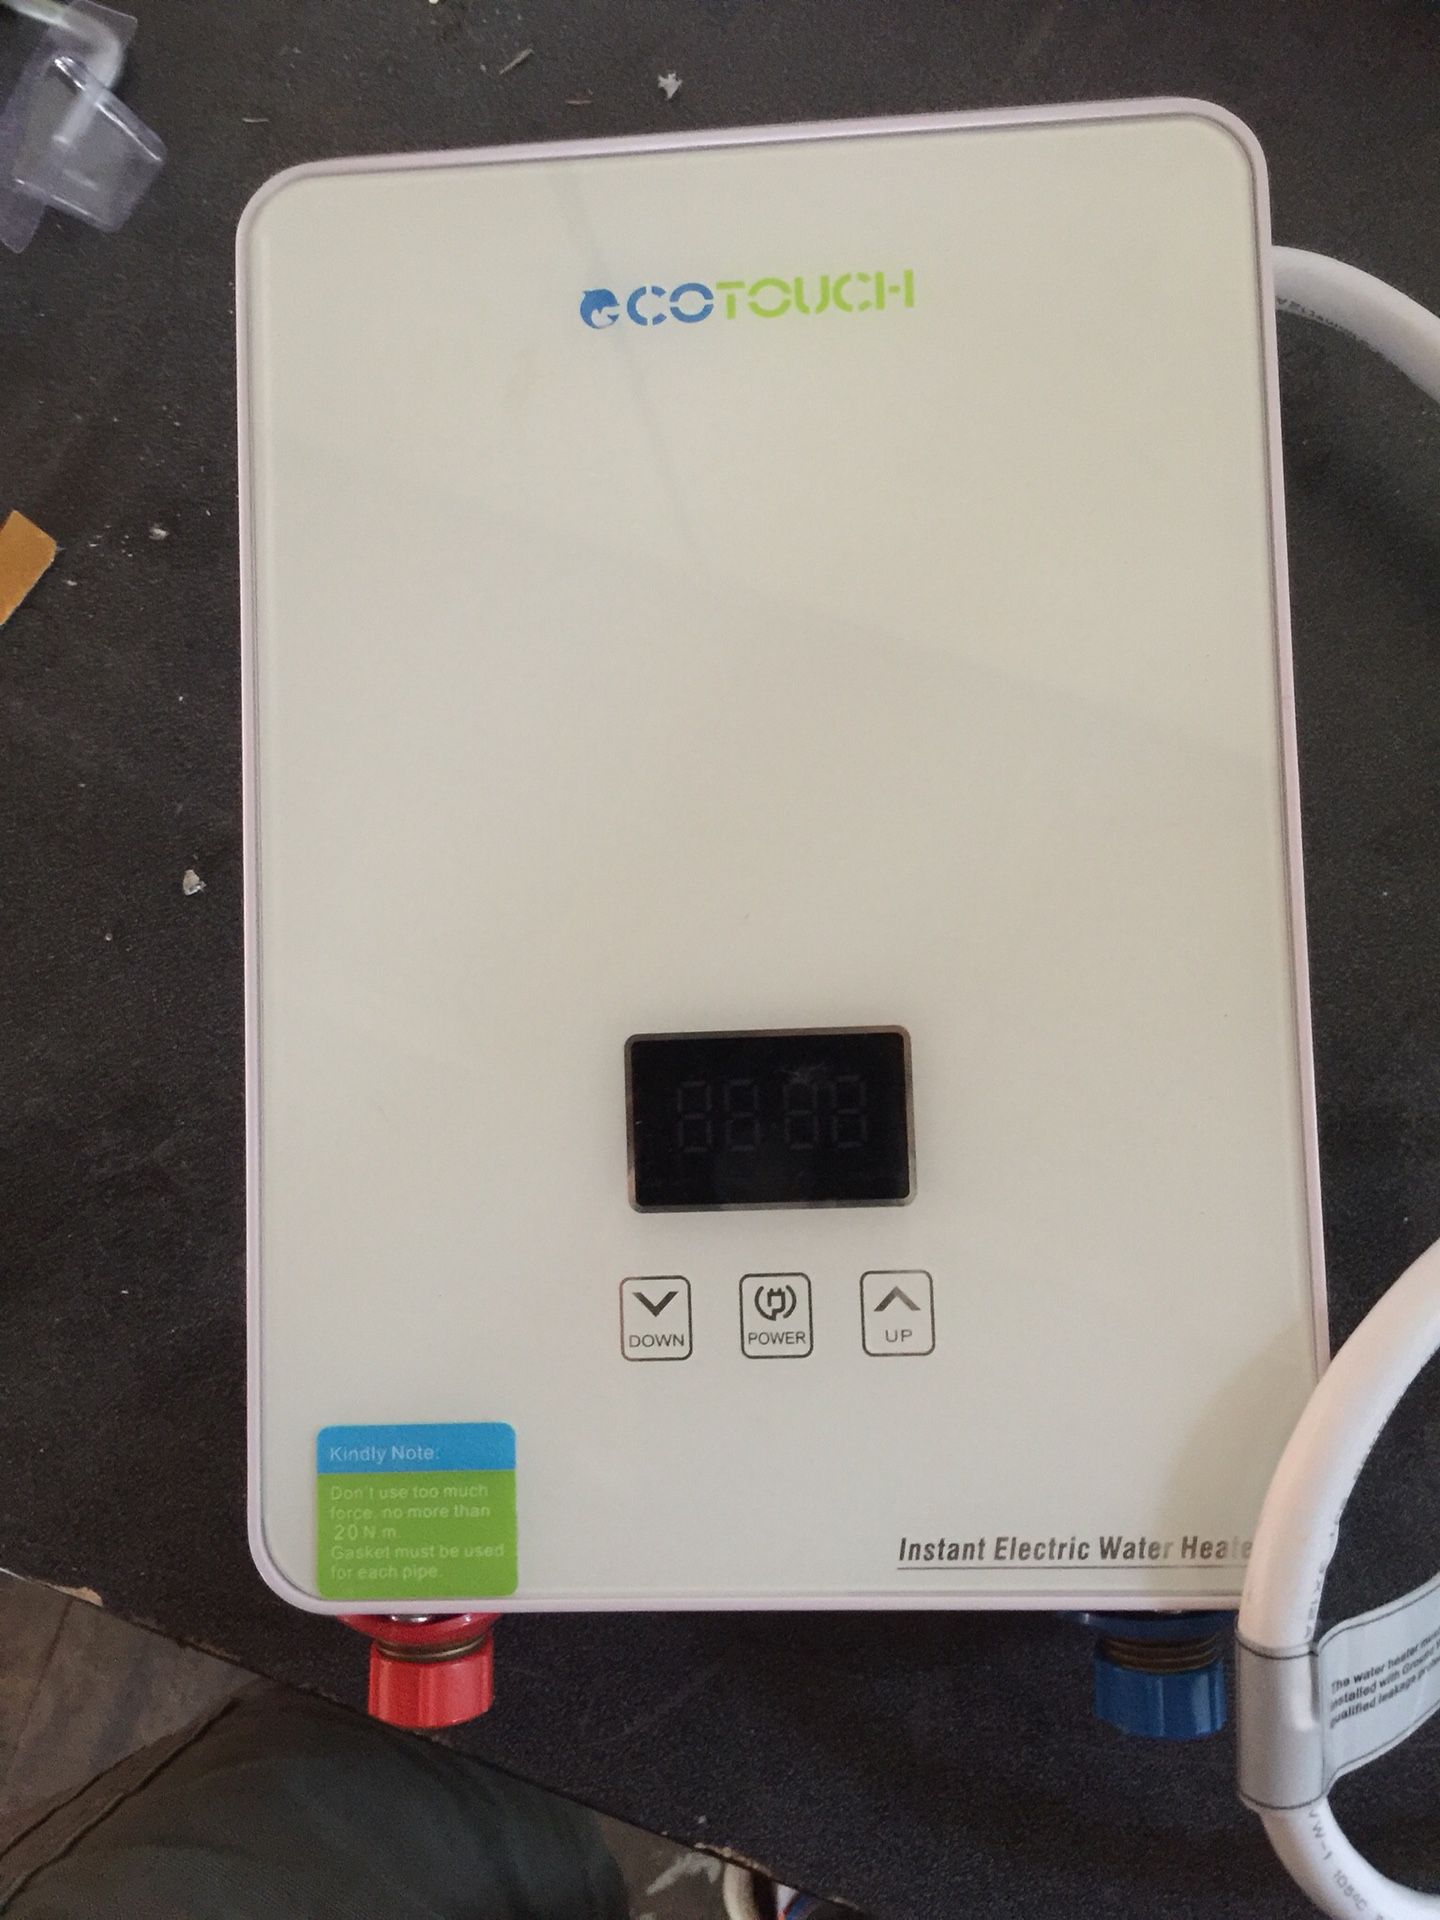 Point of Use EcoTouch water heater